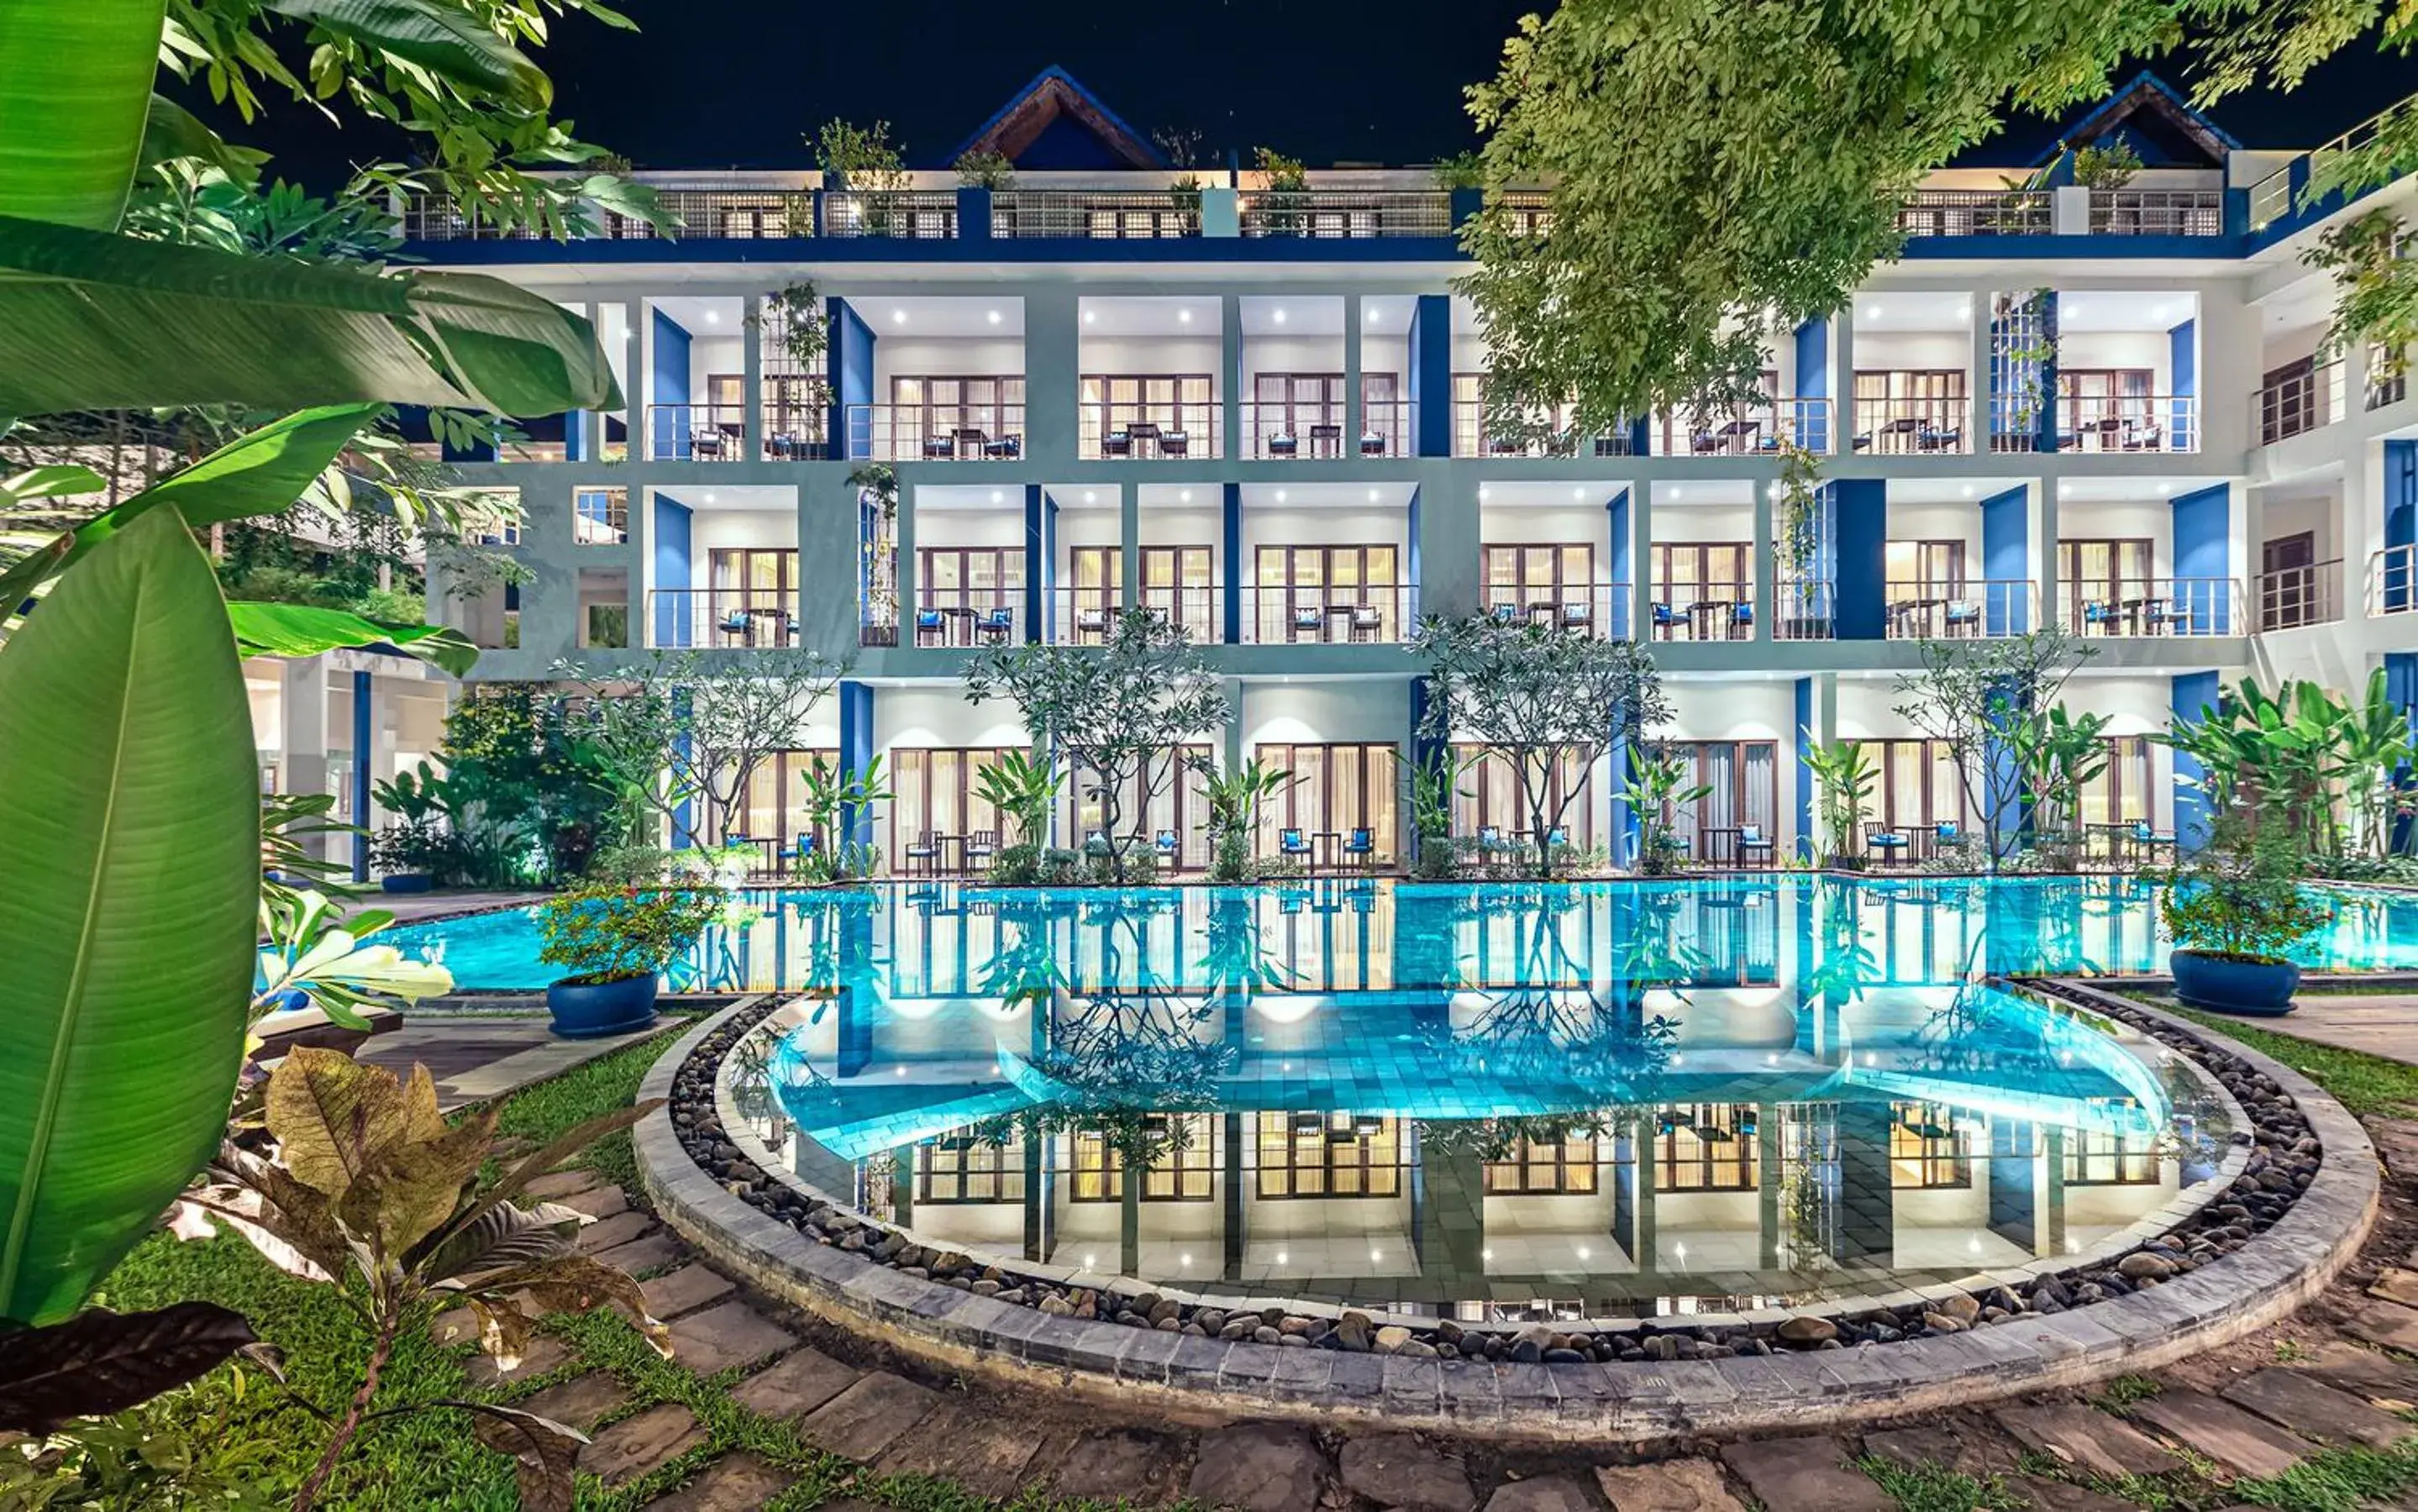 Property building, Swimming Pool in Sakmut Boutique Hotel